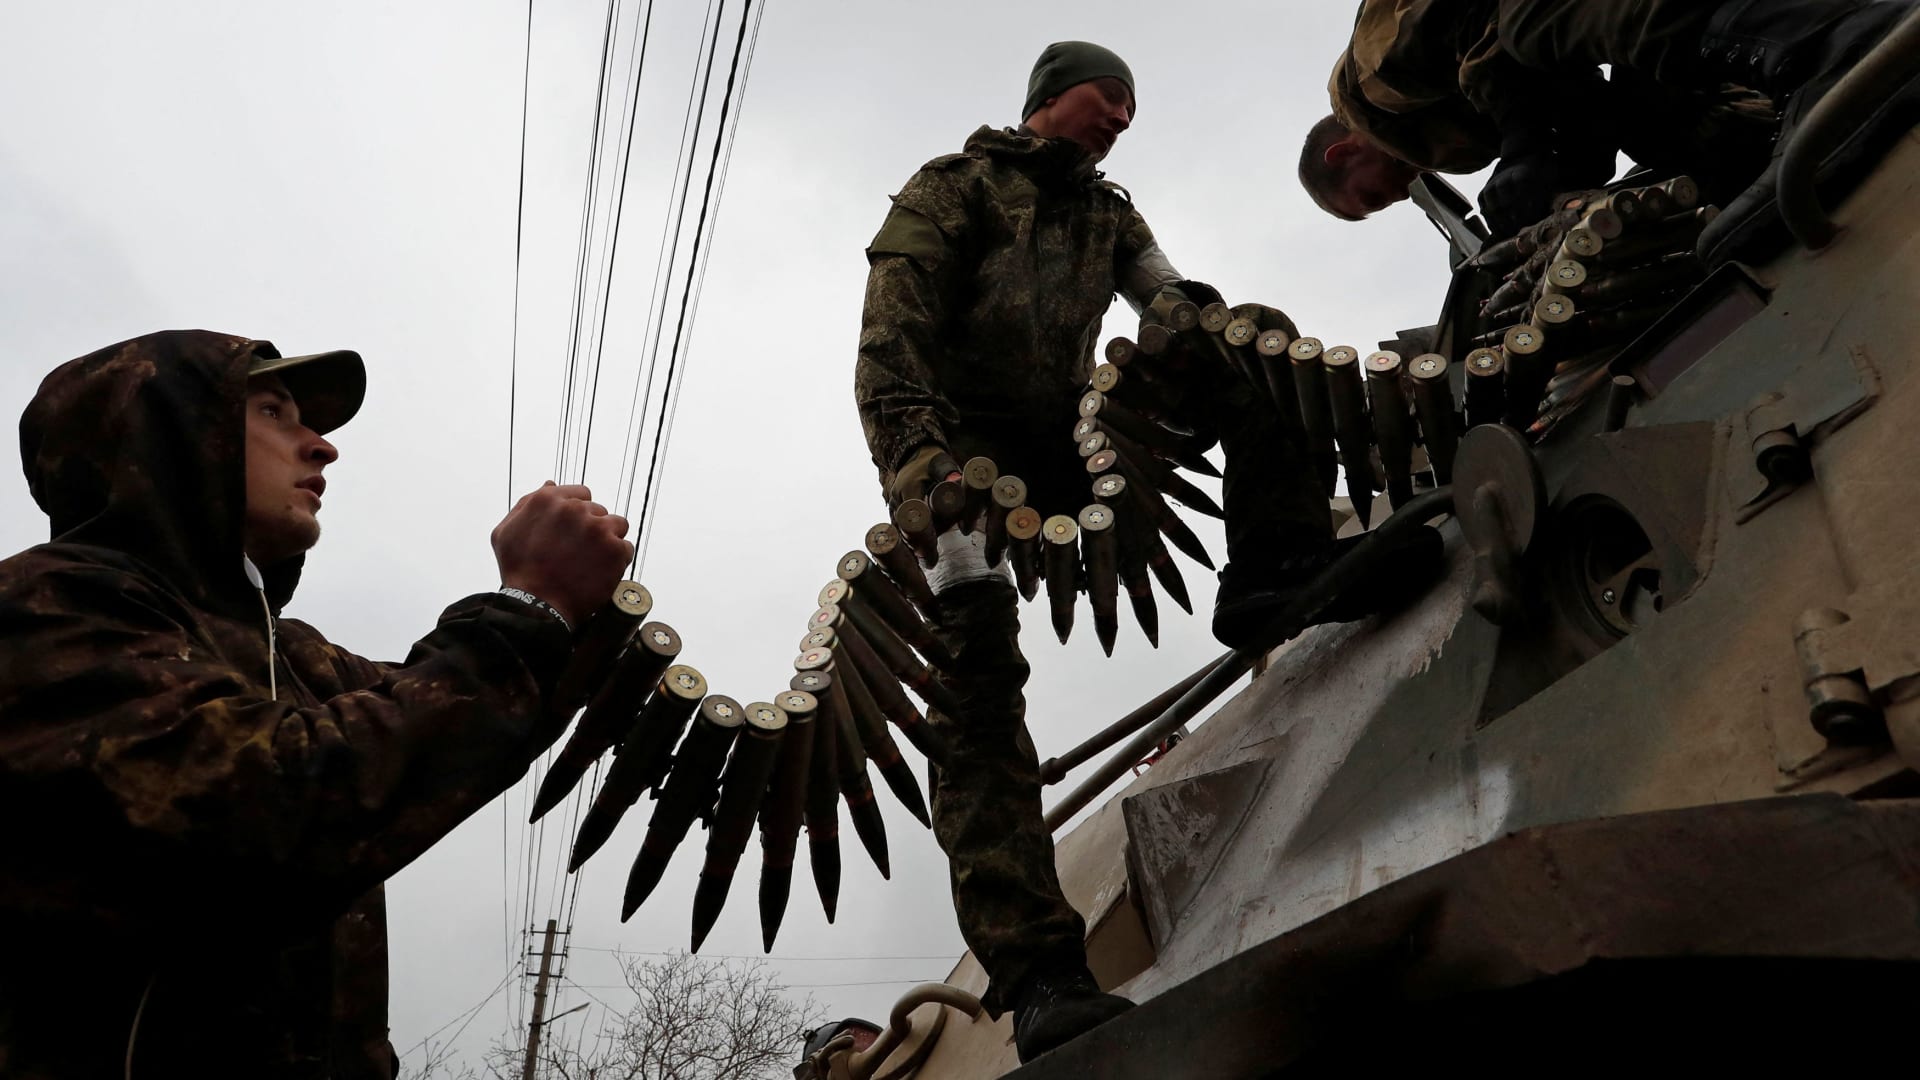 Service members of pro-Russian troops load ammunition into an armoued personnel carrier during fighting in Ukraine-Russia conflict in the southern port city of Mariupol, Ukraine April 12, 2022.